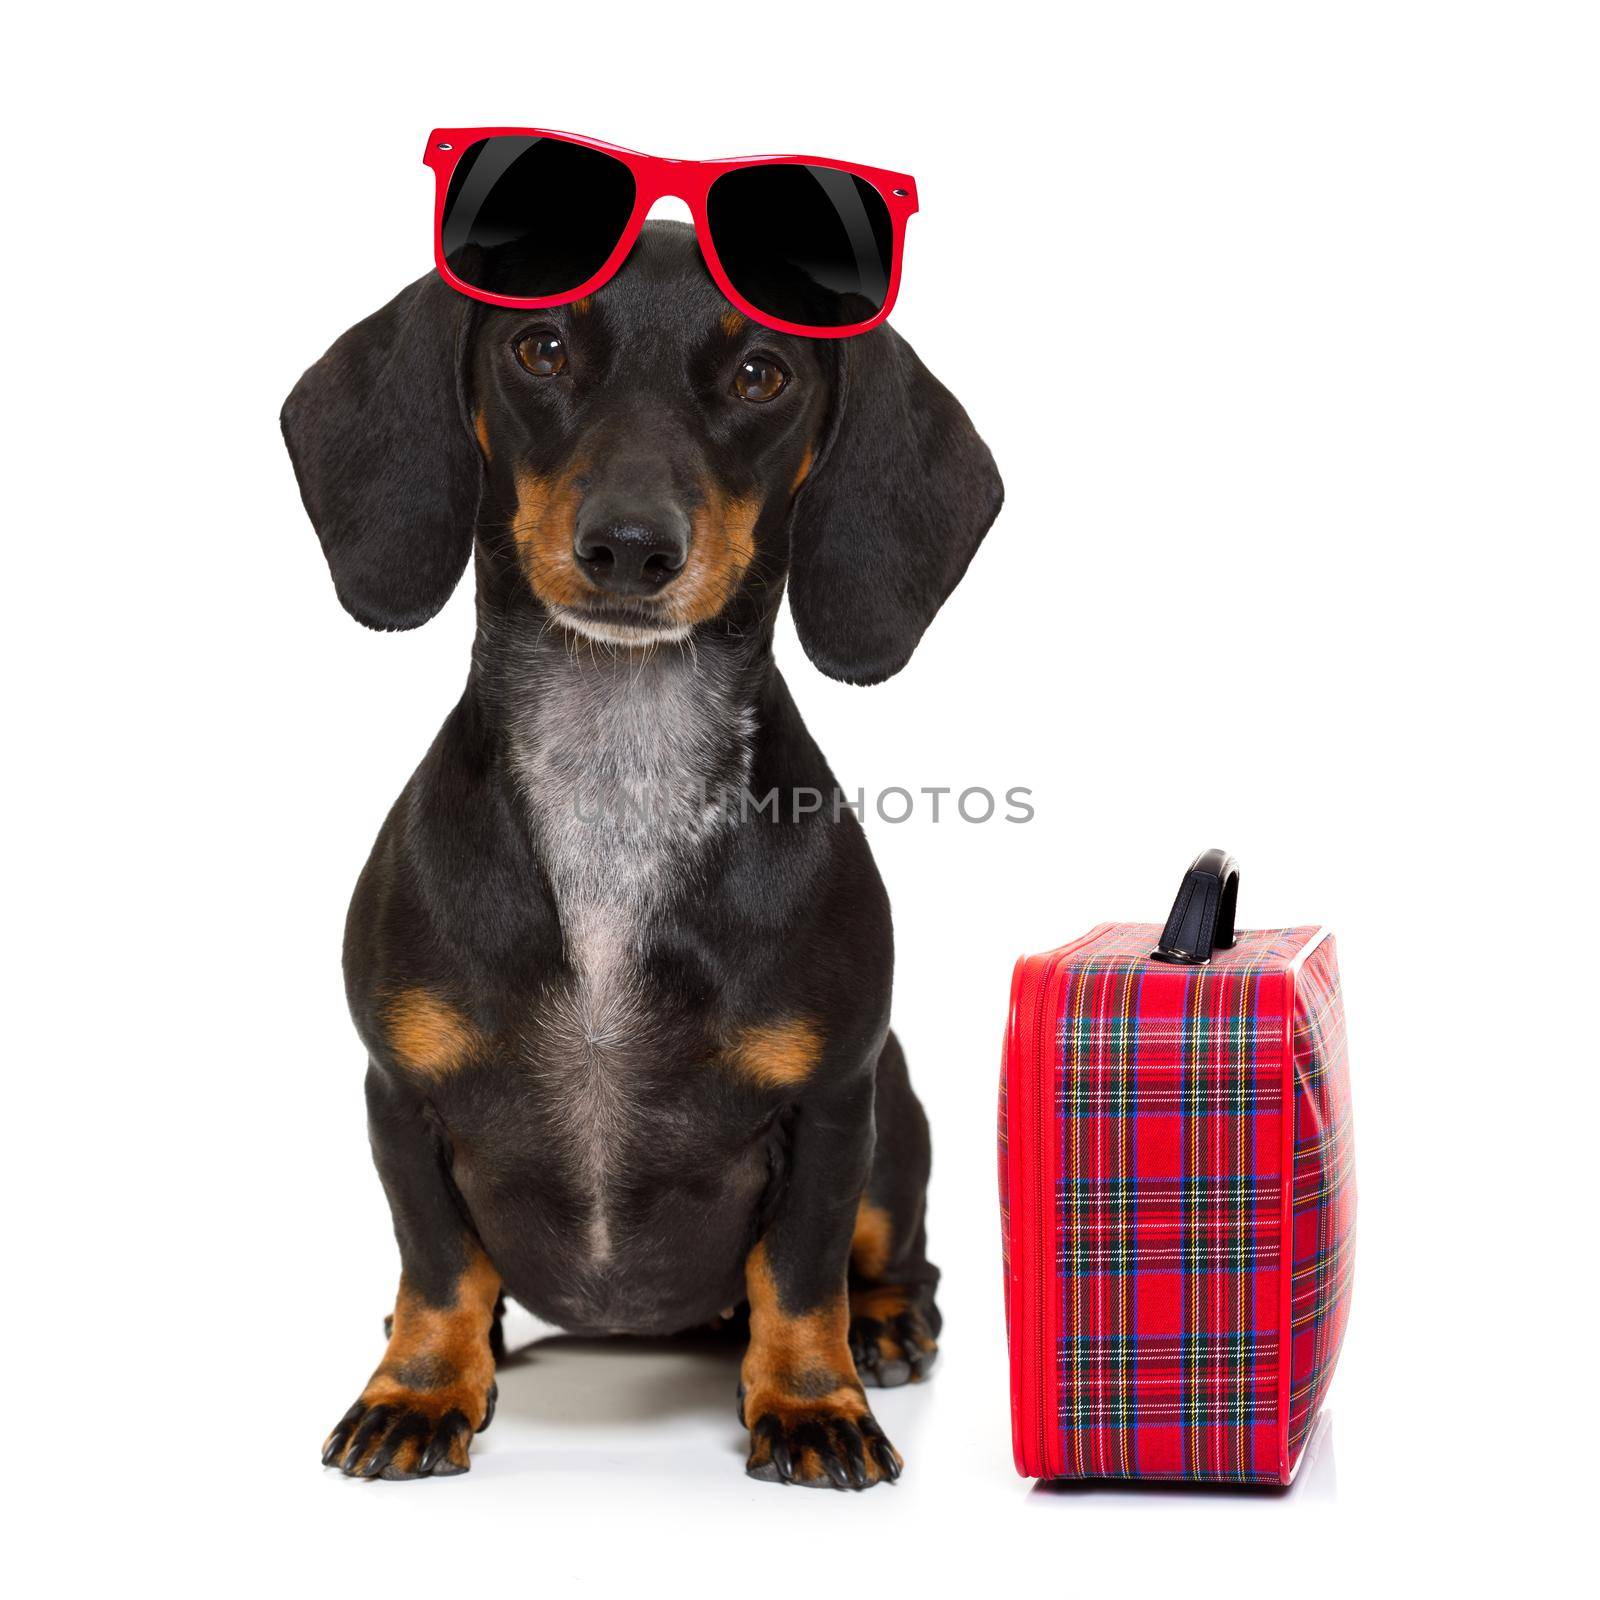 dachshund or sausage  dog on summer vacation holidays with sunglasses and bag or luggage , isolated on white background